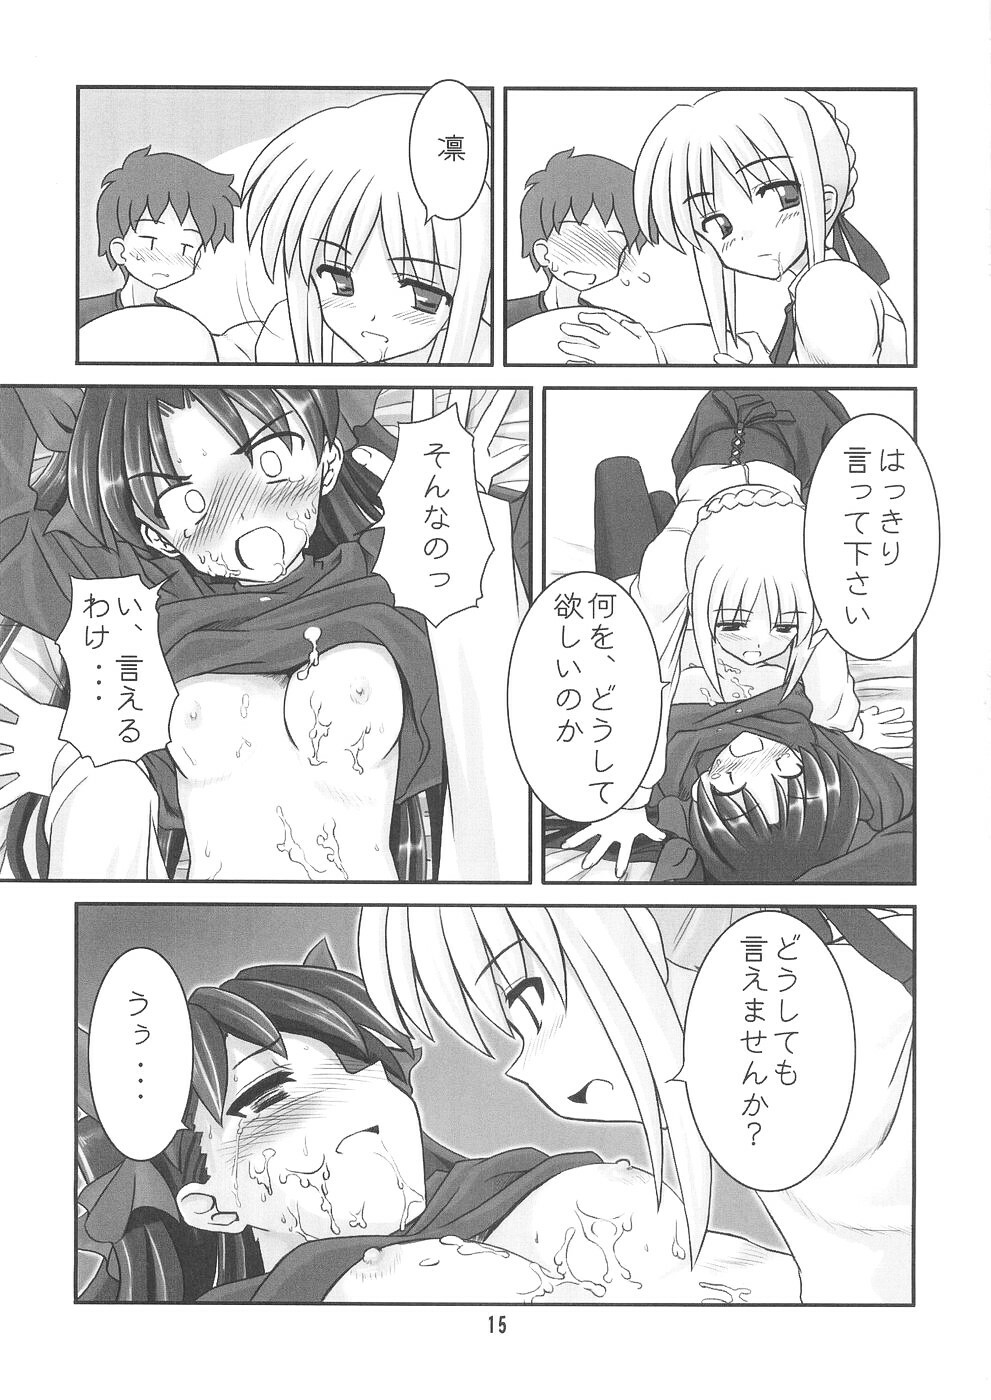 (CR35) [RUBBISH Selecting Squad (Namonashi)] Moon Marguerite (Fate/stay night) page 14 full